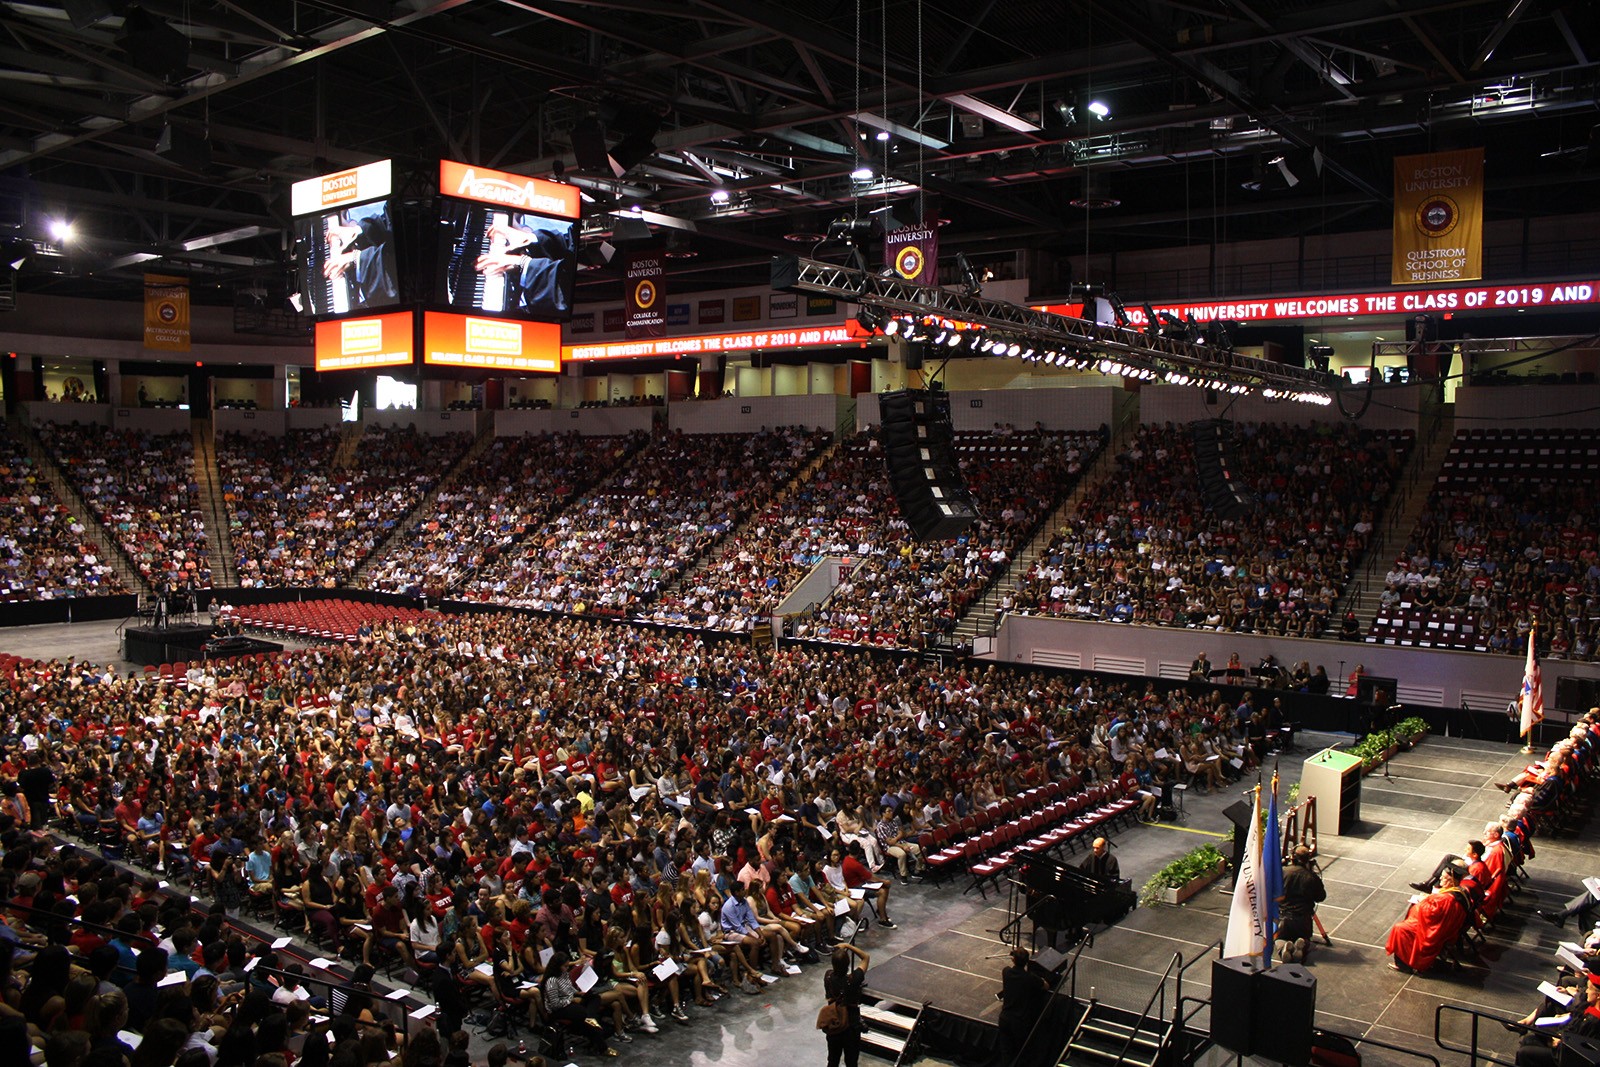 The Class of 2019 was welcomed to Boston University during Sunday’s Matriculation Ceremony inside Agganis Arena. PHOTO BY BETSEY GOLDWASSER/DAILY FREE PRESS STAFF